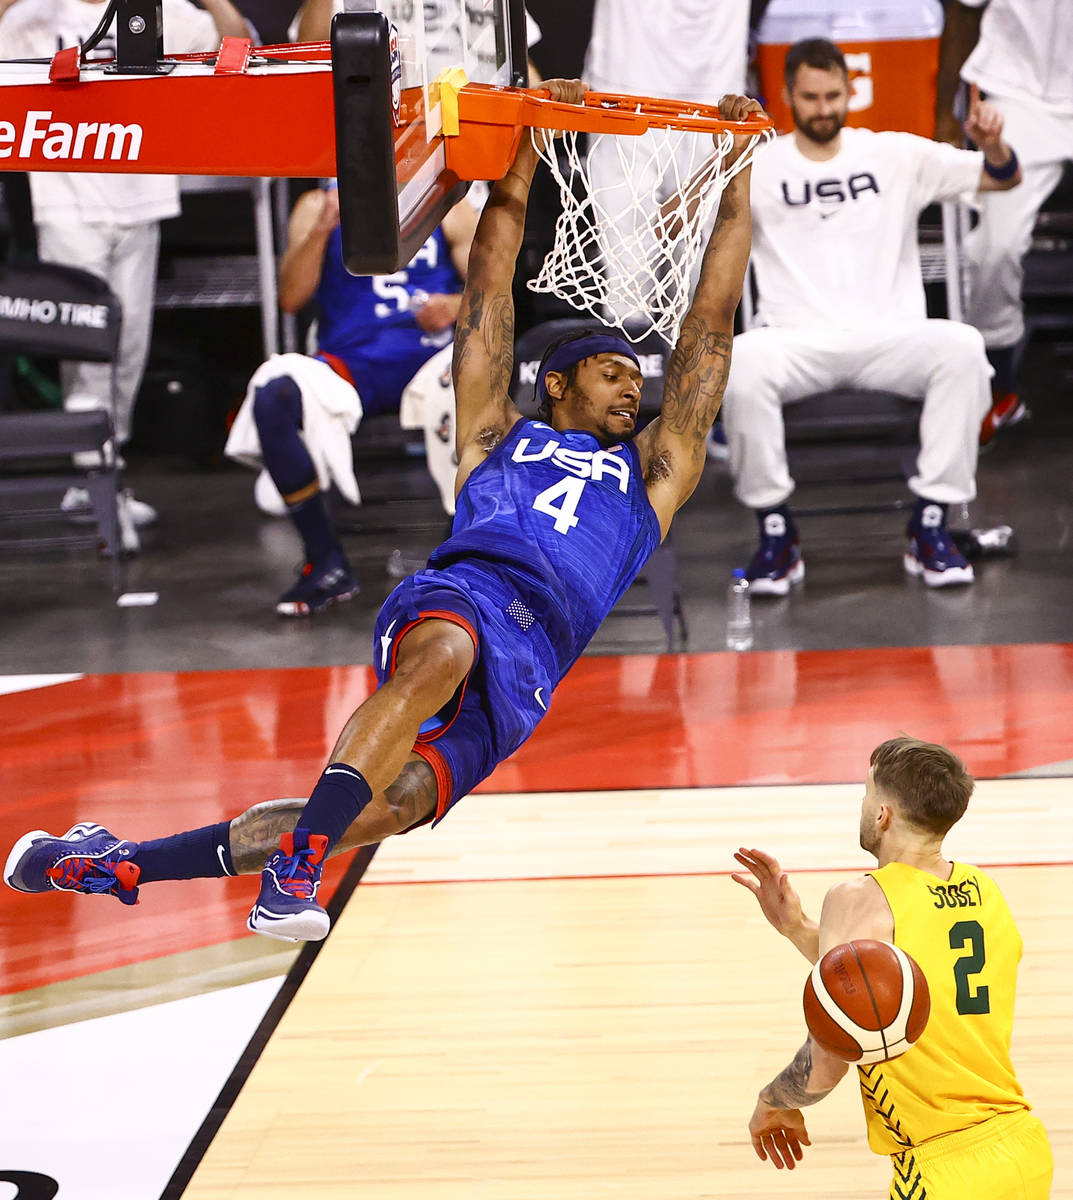 USAճ Bradley Beal (4) dunks the ball over Australia's Nathan Sobey (2) during the first h ...